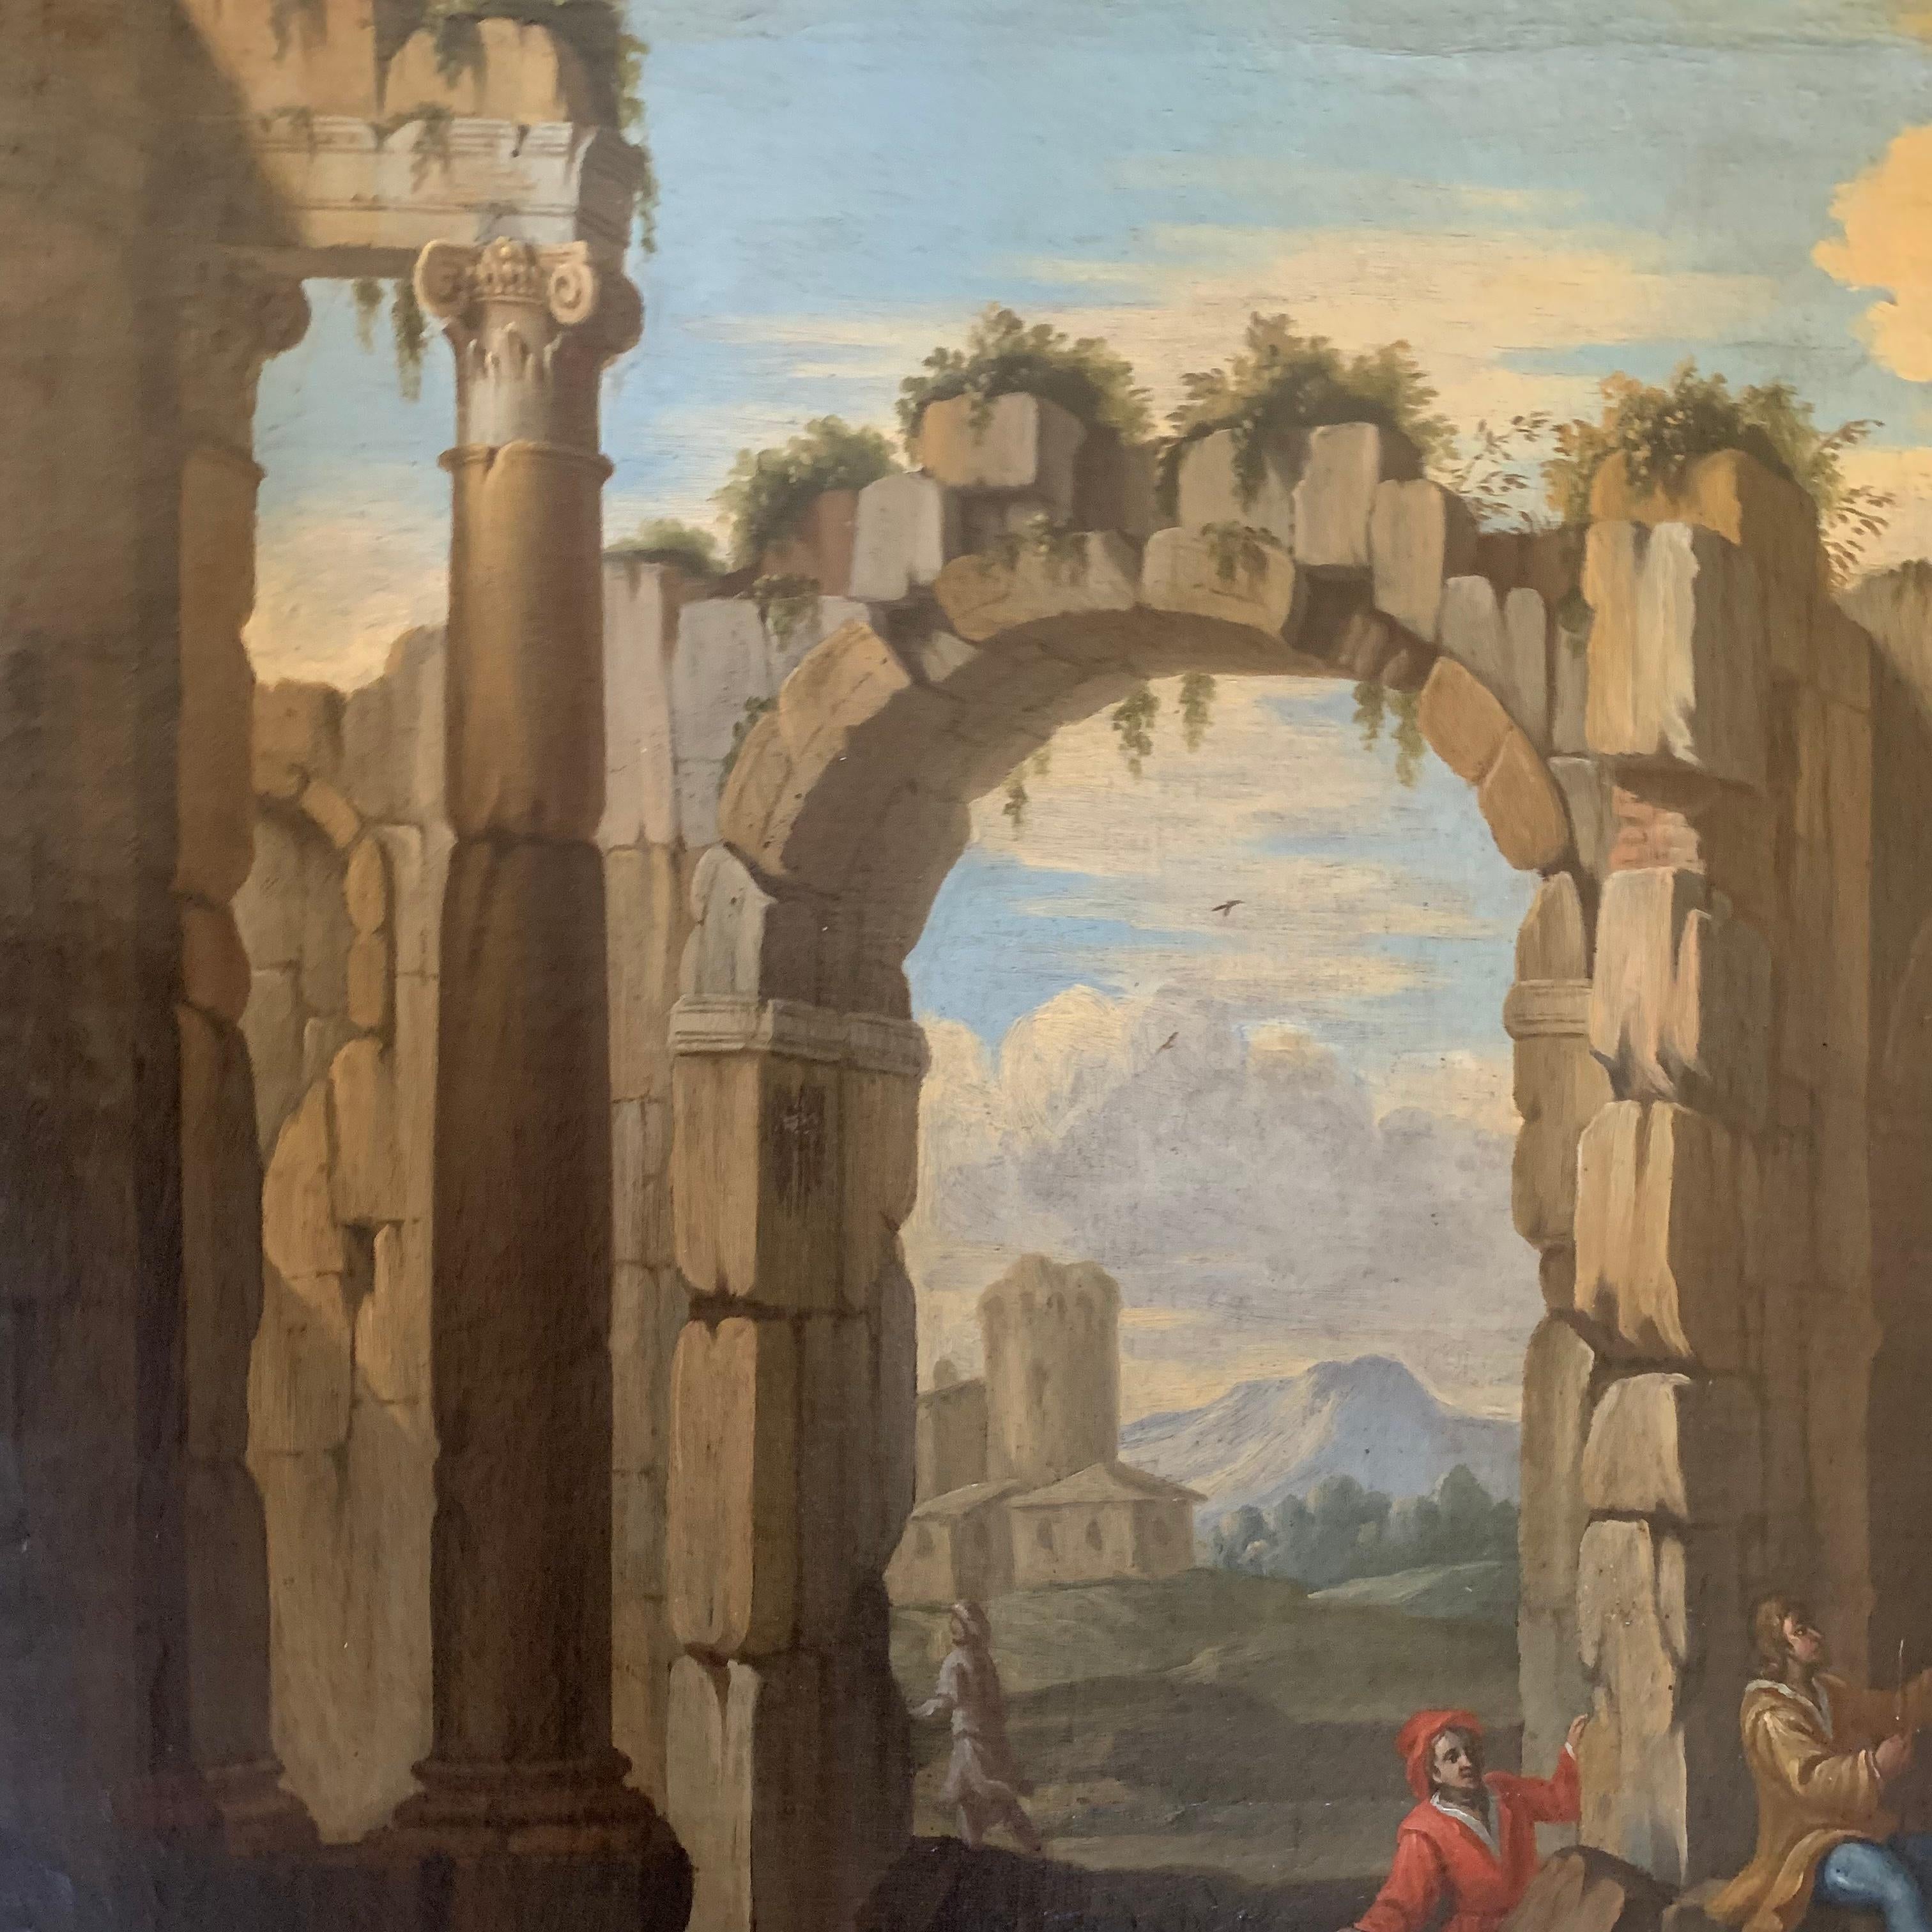 Roman school. Lazio landscape. Early 18th century.
Architectural Capriccio with Ancient Rome ruins with arches and a temple to the left with columns and mountains in the distance. In the foreground are three characters dressed in the traditional